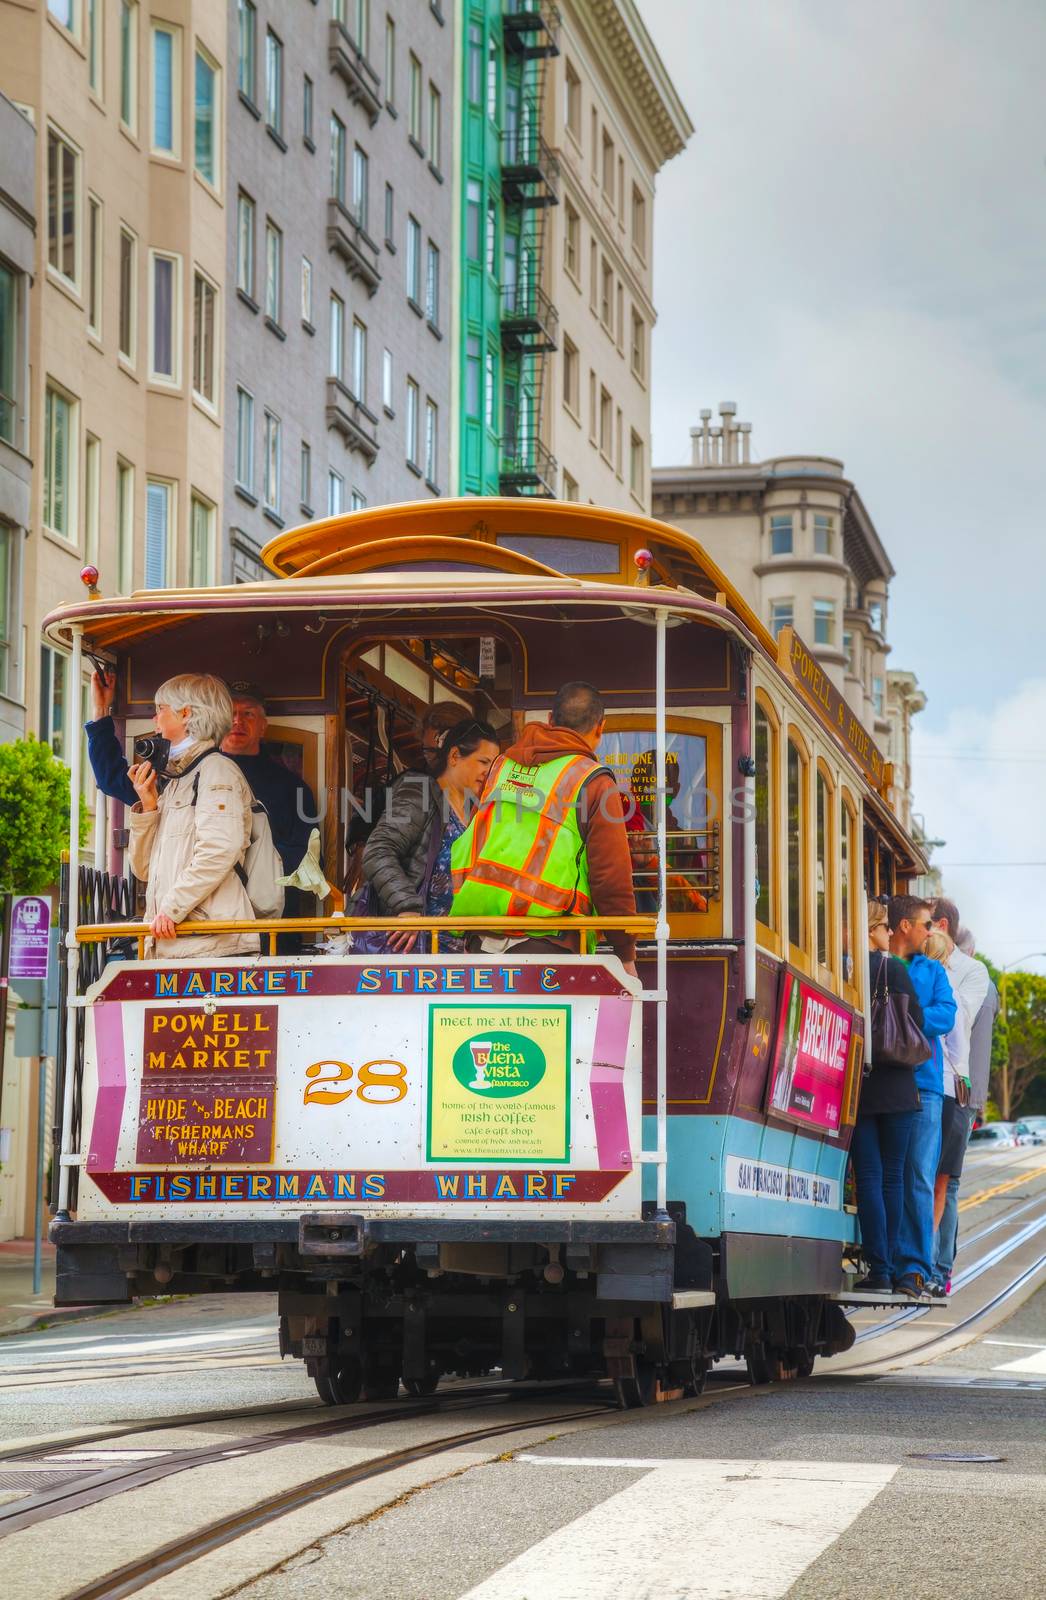 SAN FRANCISCO - APRIL 24: Famous cable car with people at a steep street on April 24, 2014 in San Francisco, California. The cable car system forms part of the intermodal urban transport network.